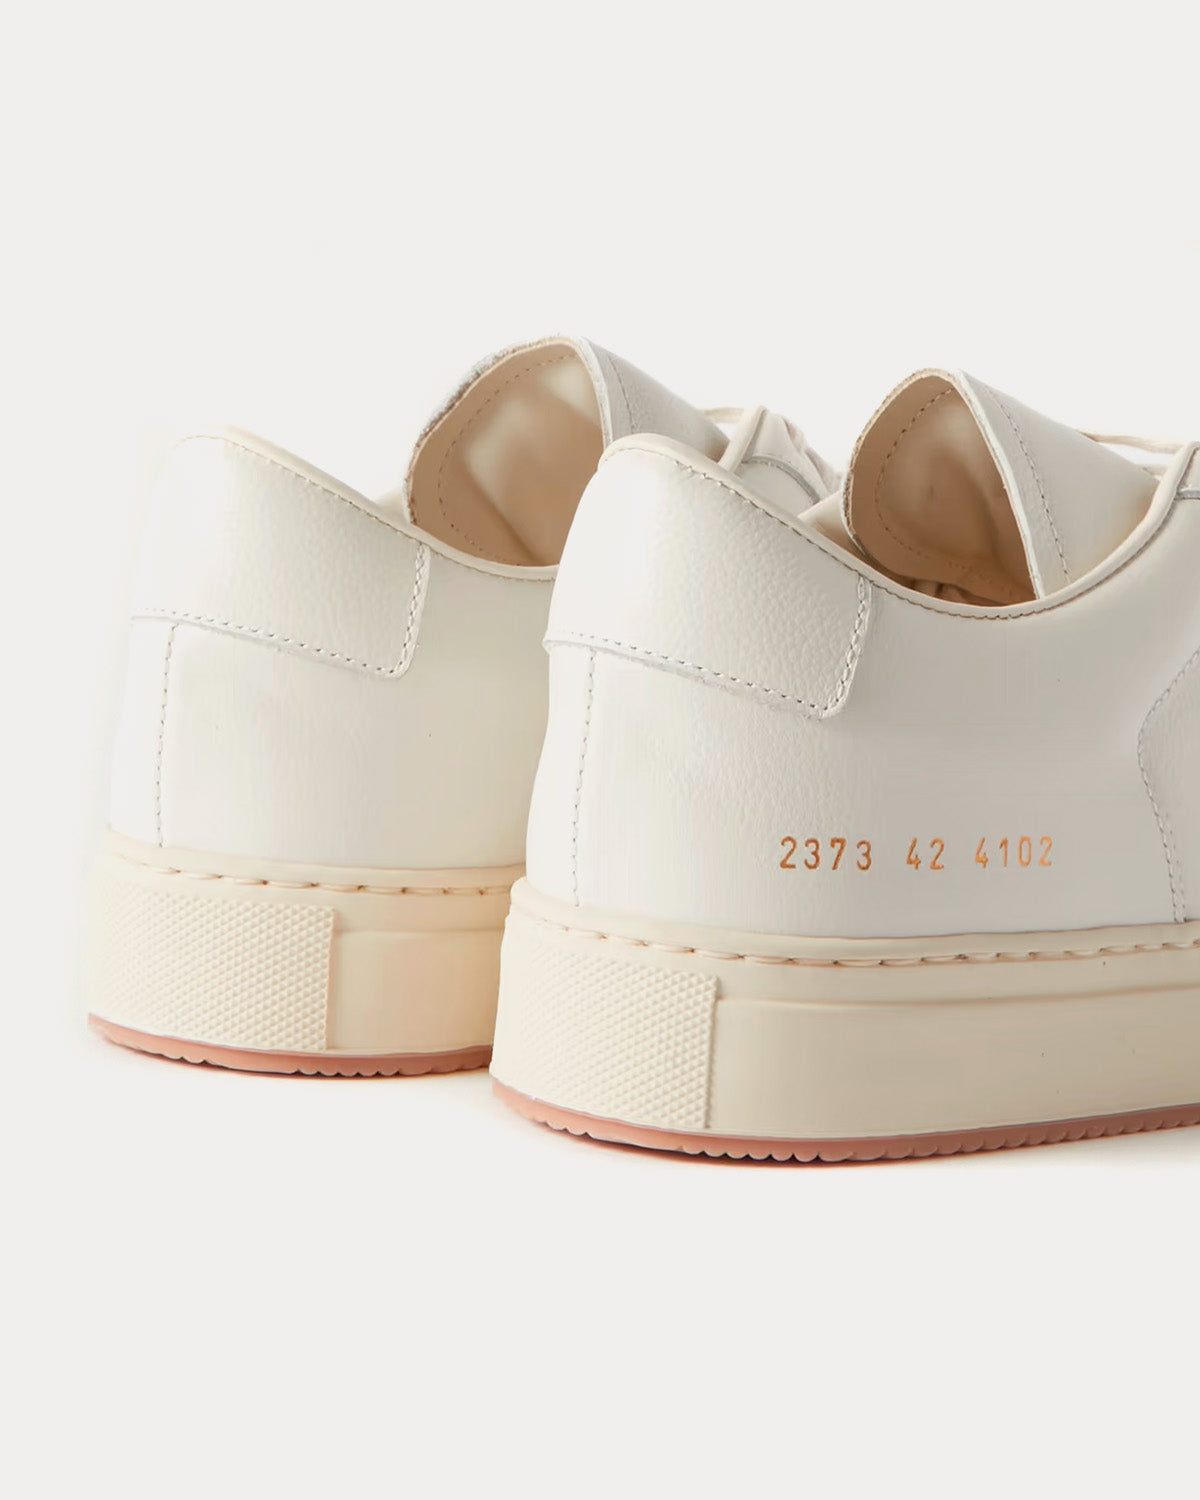 Common Projects - Decades Leather White Low Top Sneakers